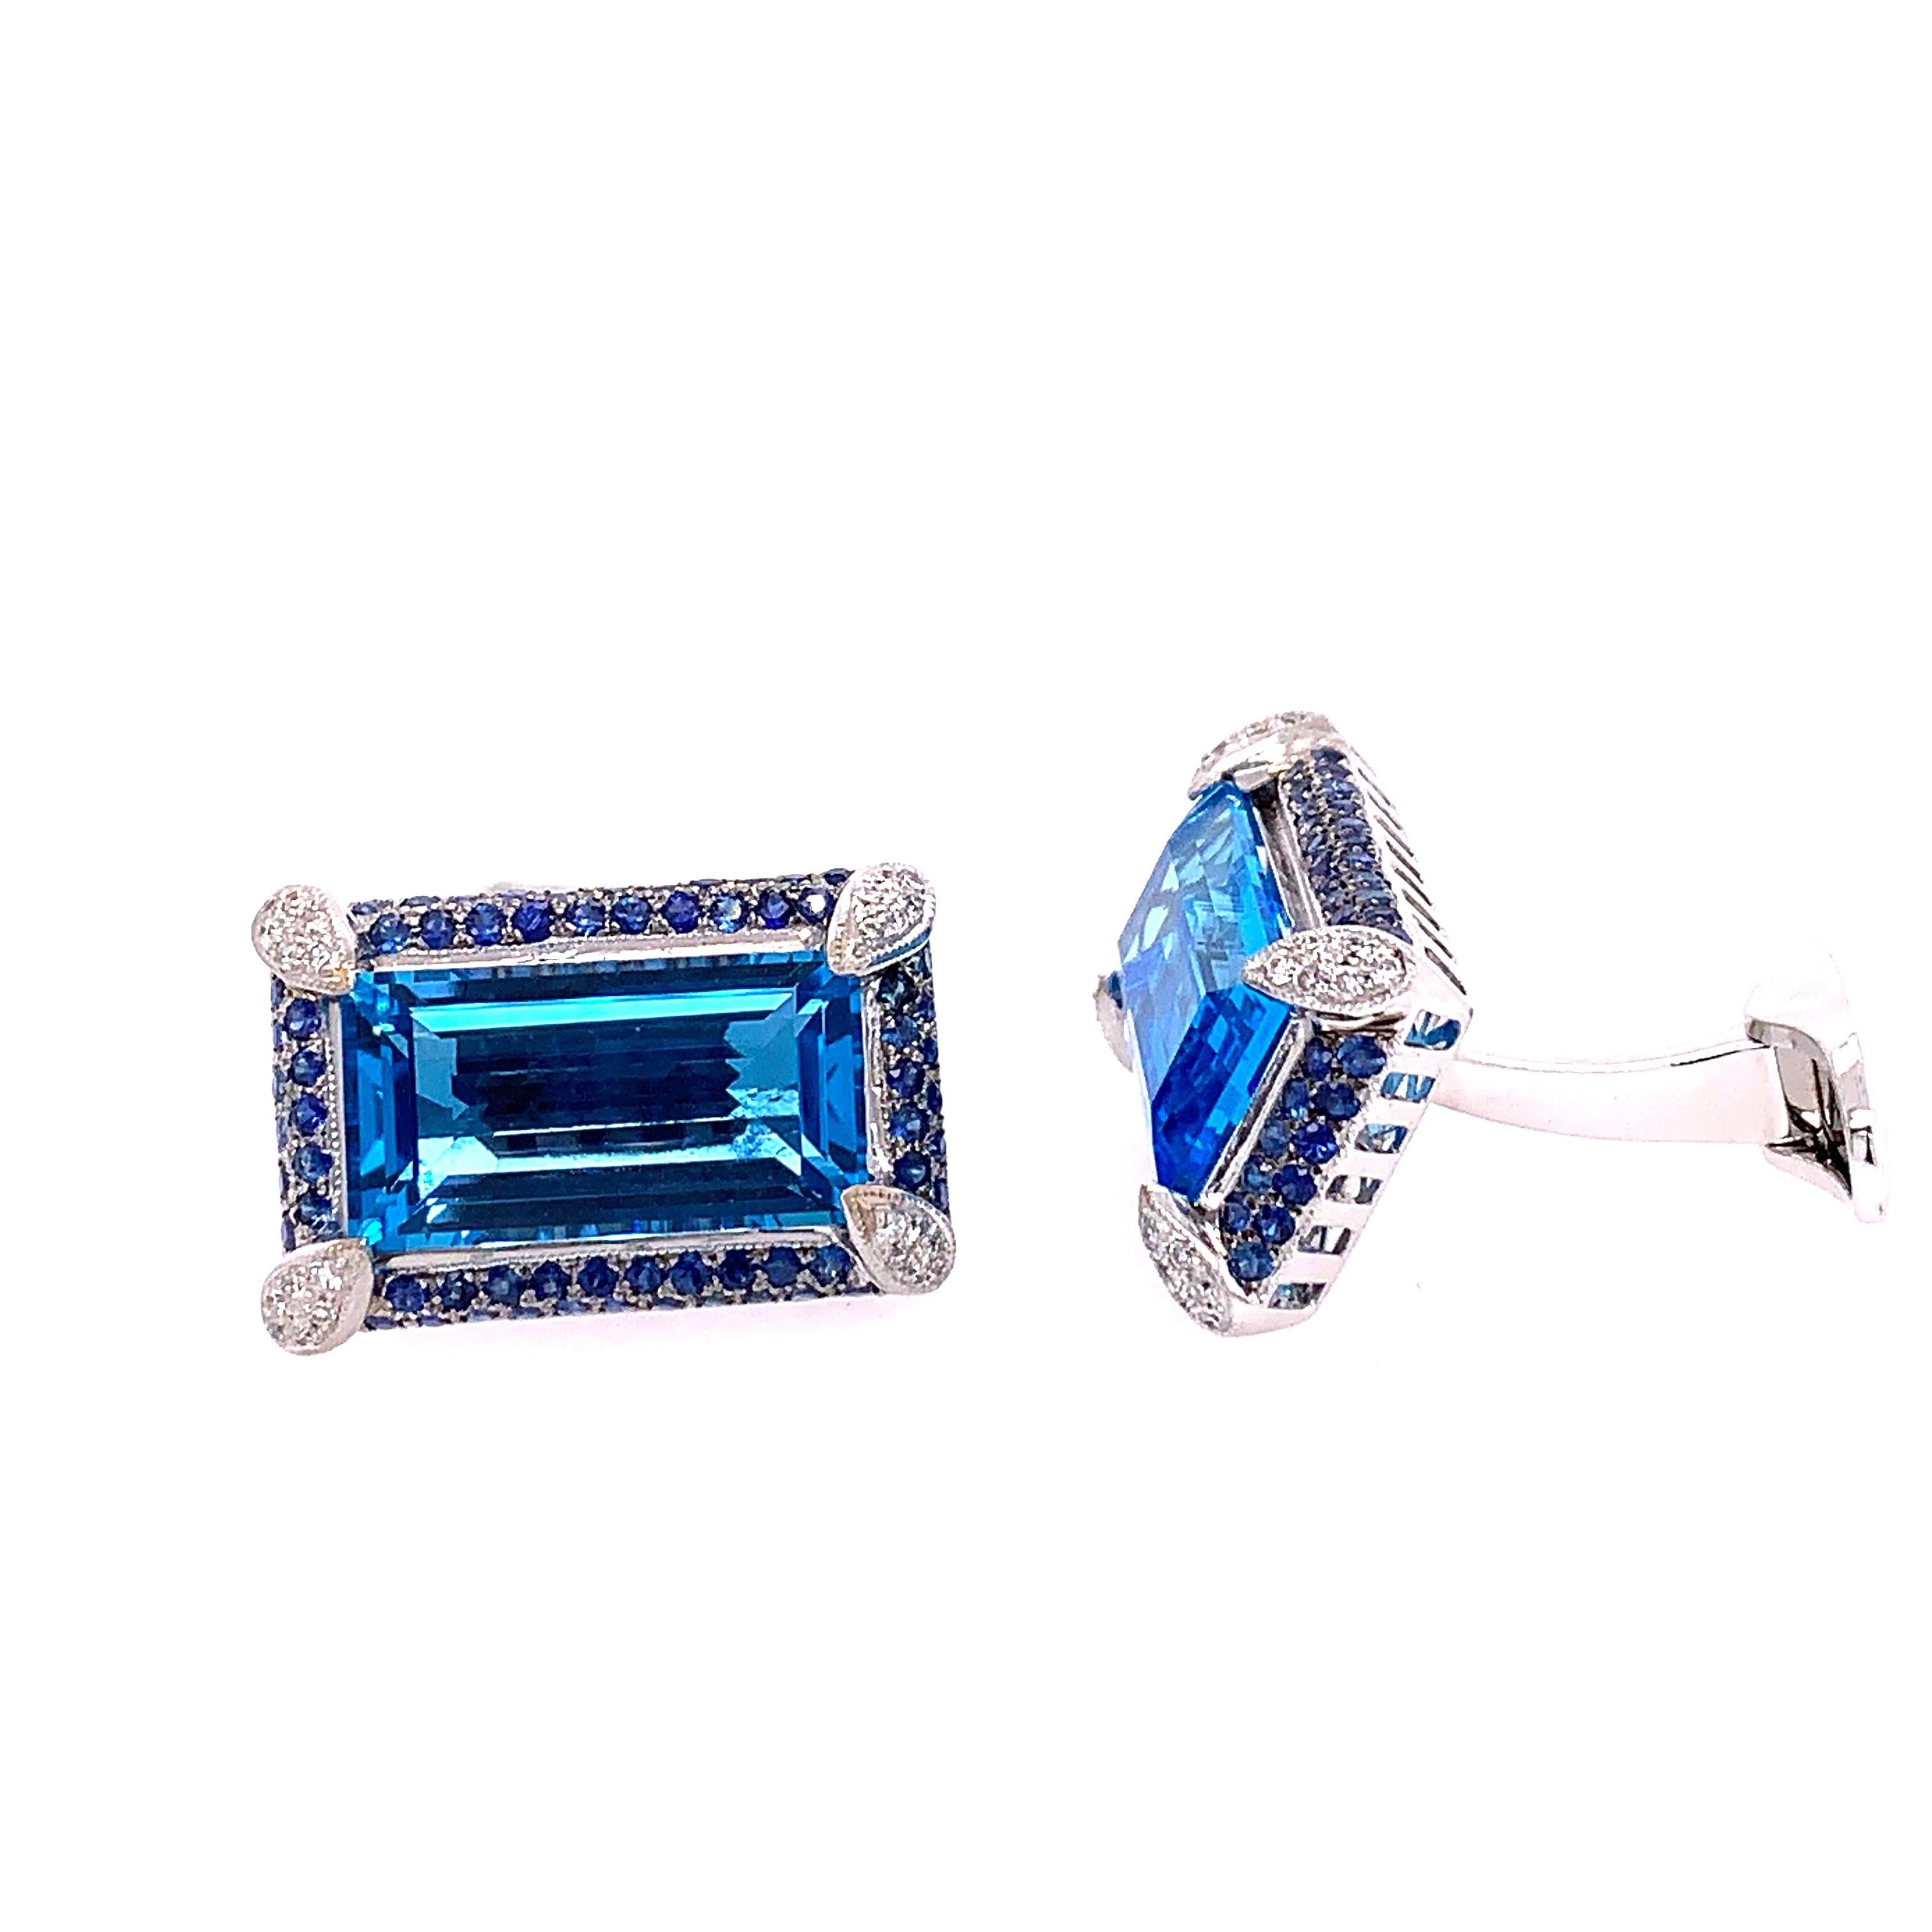 These one of a kind beautiful Emerald Cut Blue Topaz cuff links feature 2 Topaz Stones weighing approximately 16 carats.
These stones are framed with approximately 1.30 carats of Blue Sapphires as well as approximately .25 carats of white